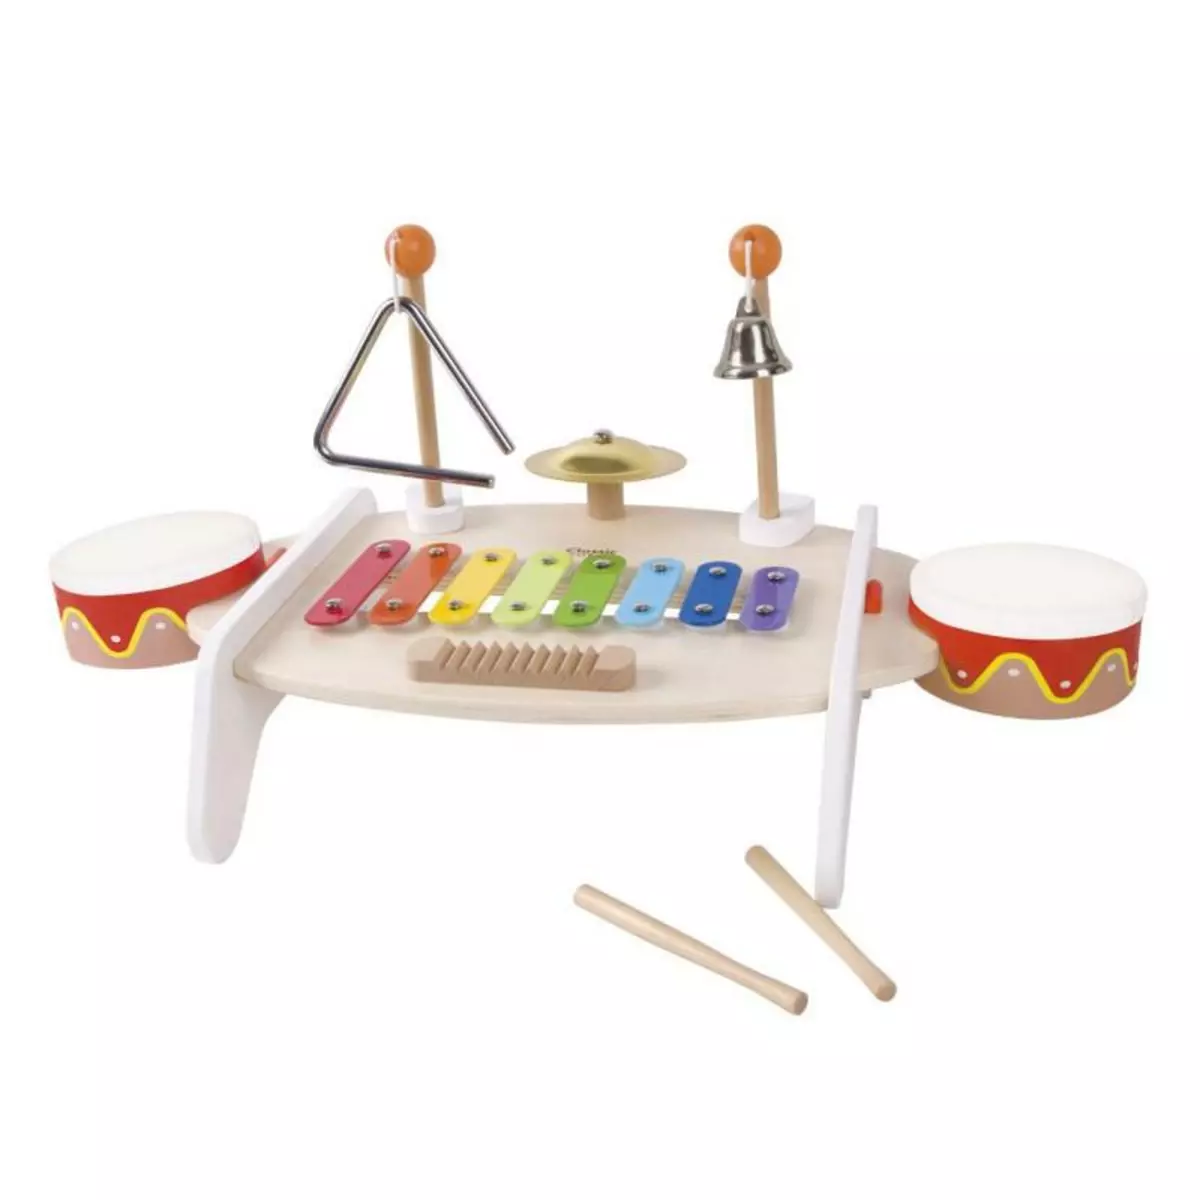 CLASSIC WORLD Classic World Wooden Music Table